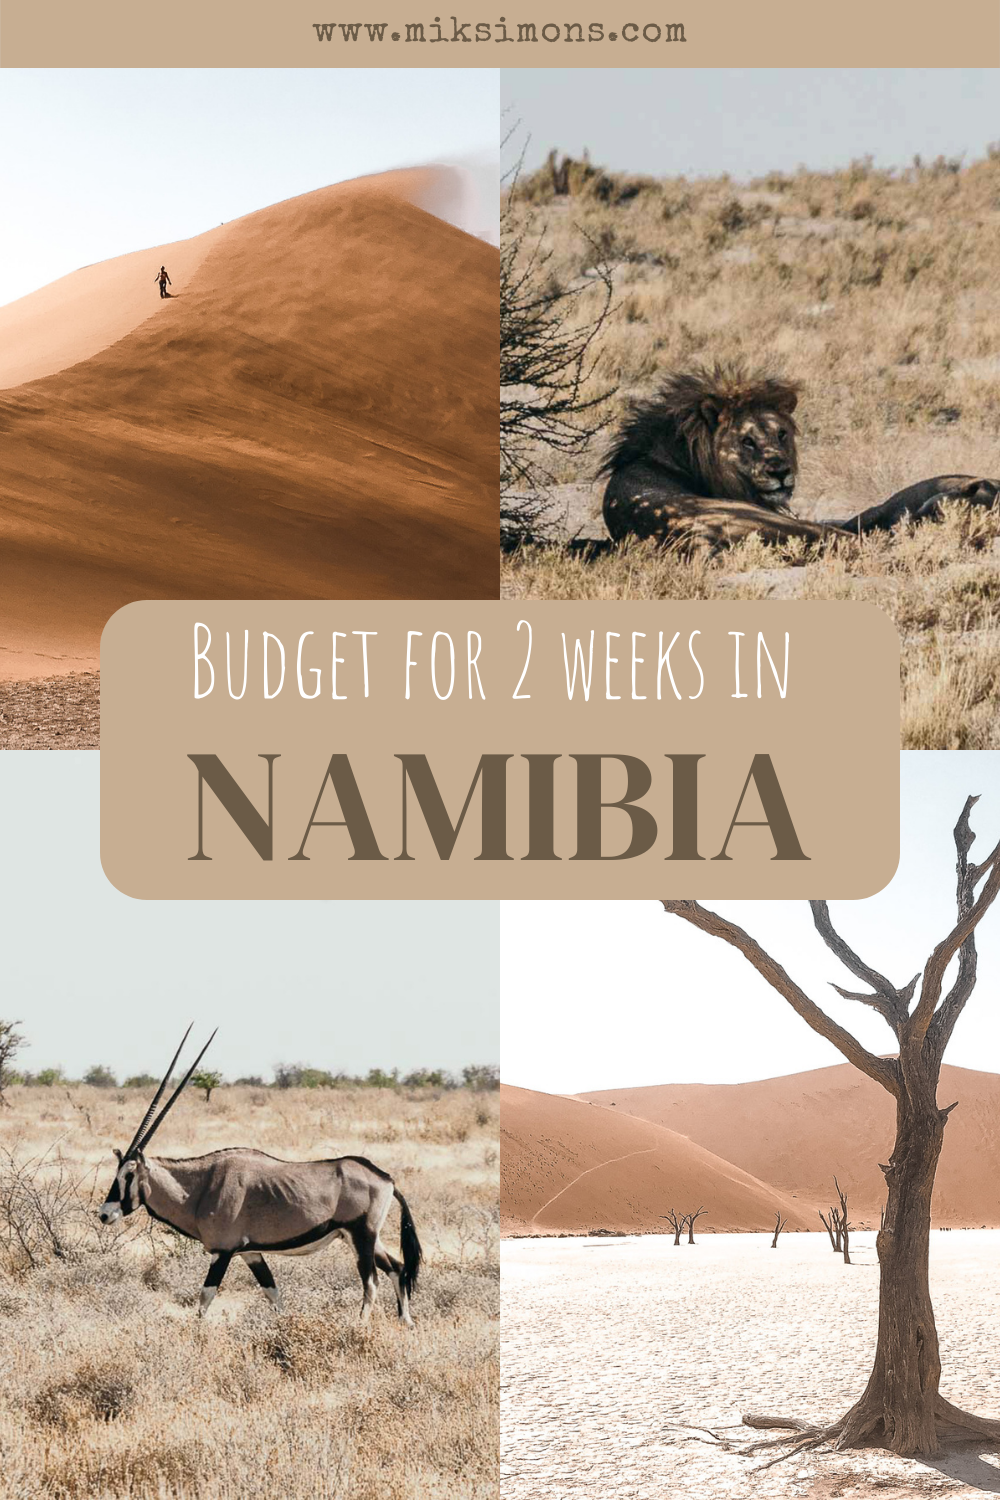 Self-drive Namibia: Budget for 2 weeks camping in Namibia